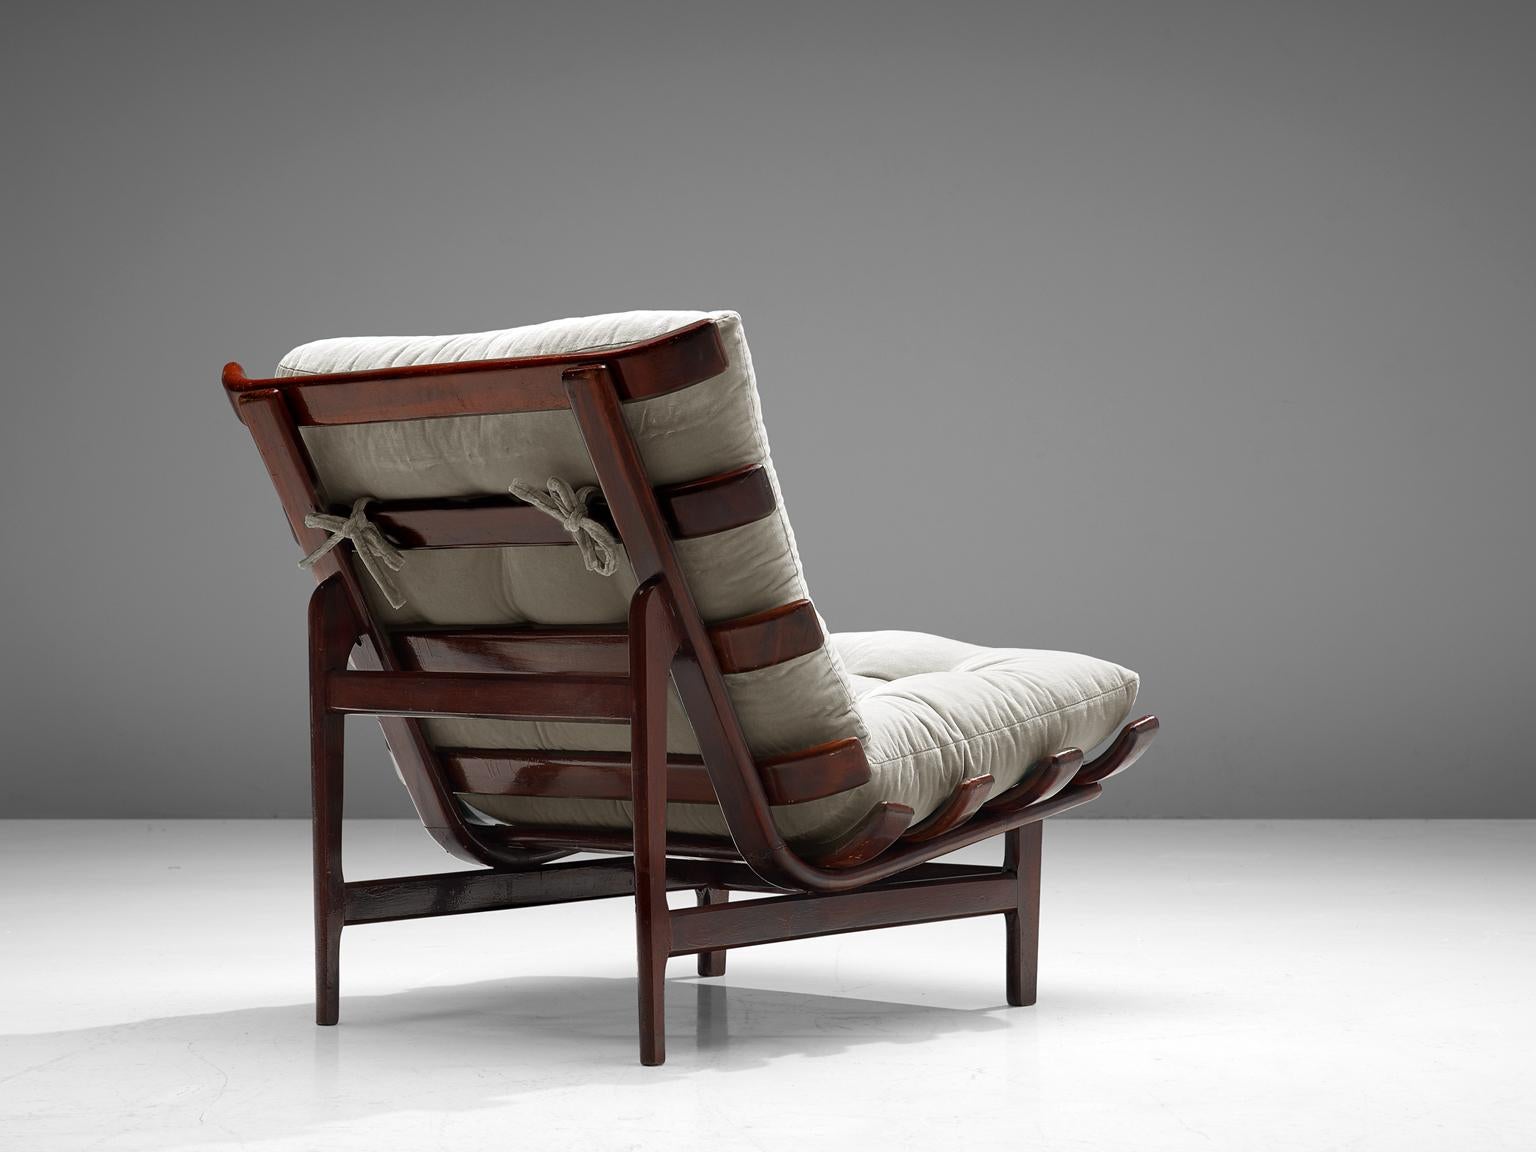 Móveis Pailar, lounge chair, rosewood, Brazil, 1960s.

Wonderful chair with rhythmic frame that reminds of an organic rib structure. The frame is completely executed in solid rosewood and finished with thick, tufted cushions that you can take off as